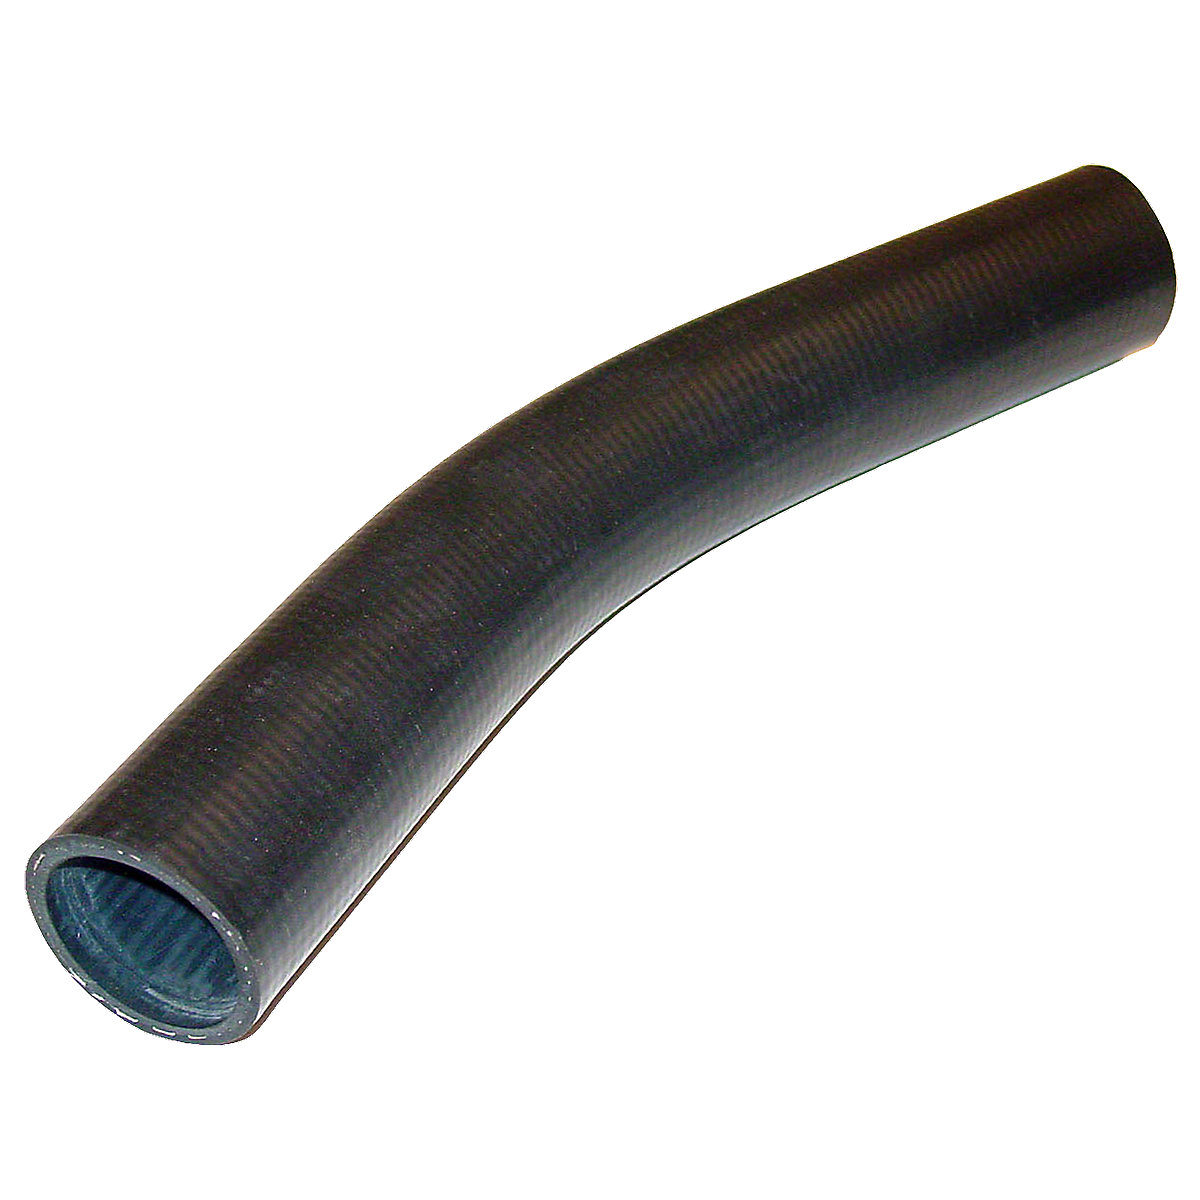 Upper Radiator Hose For Allis Chalmers: D17 Gas Tractors